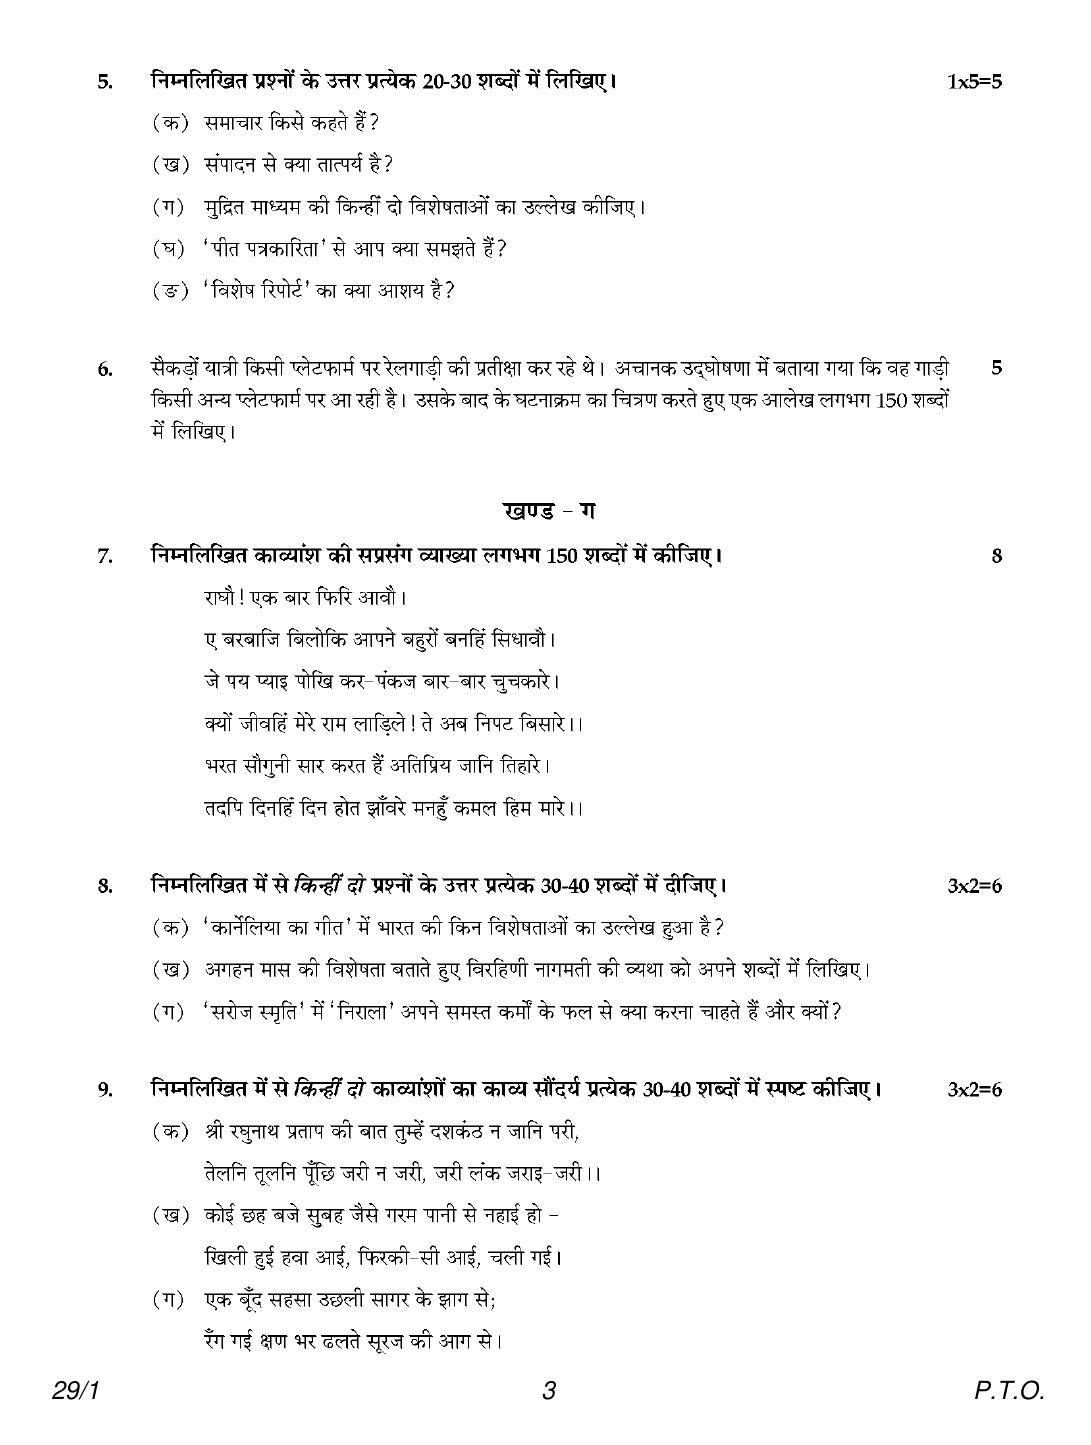 CBSE Class 12 29-1 Hindi Elective 2018 Question Paper - Page 3